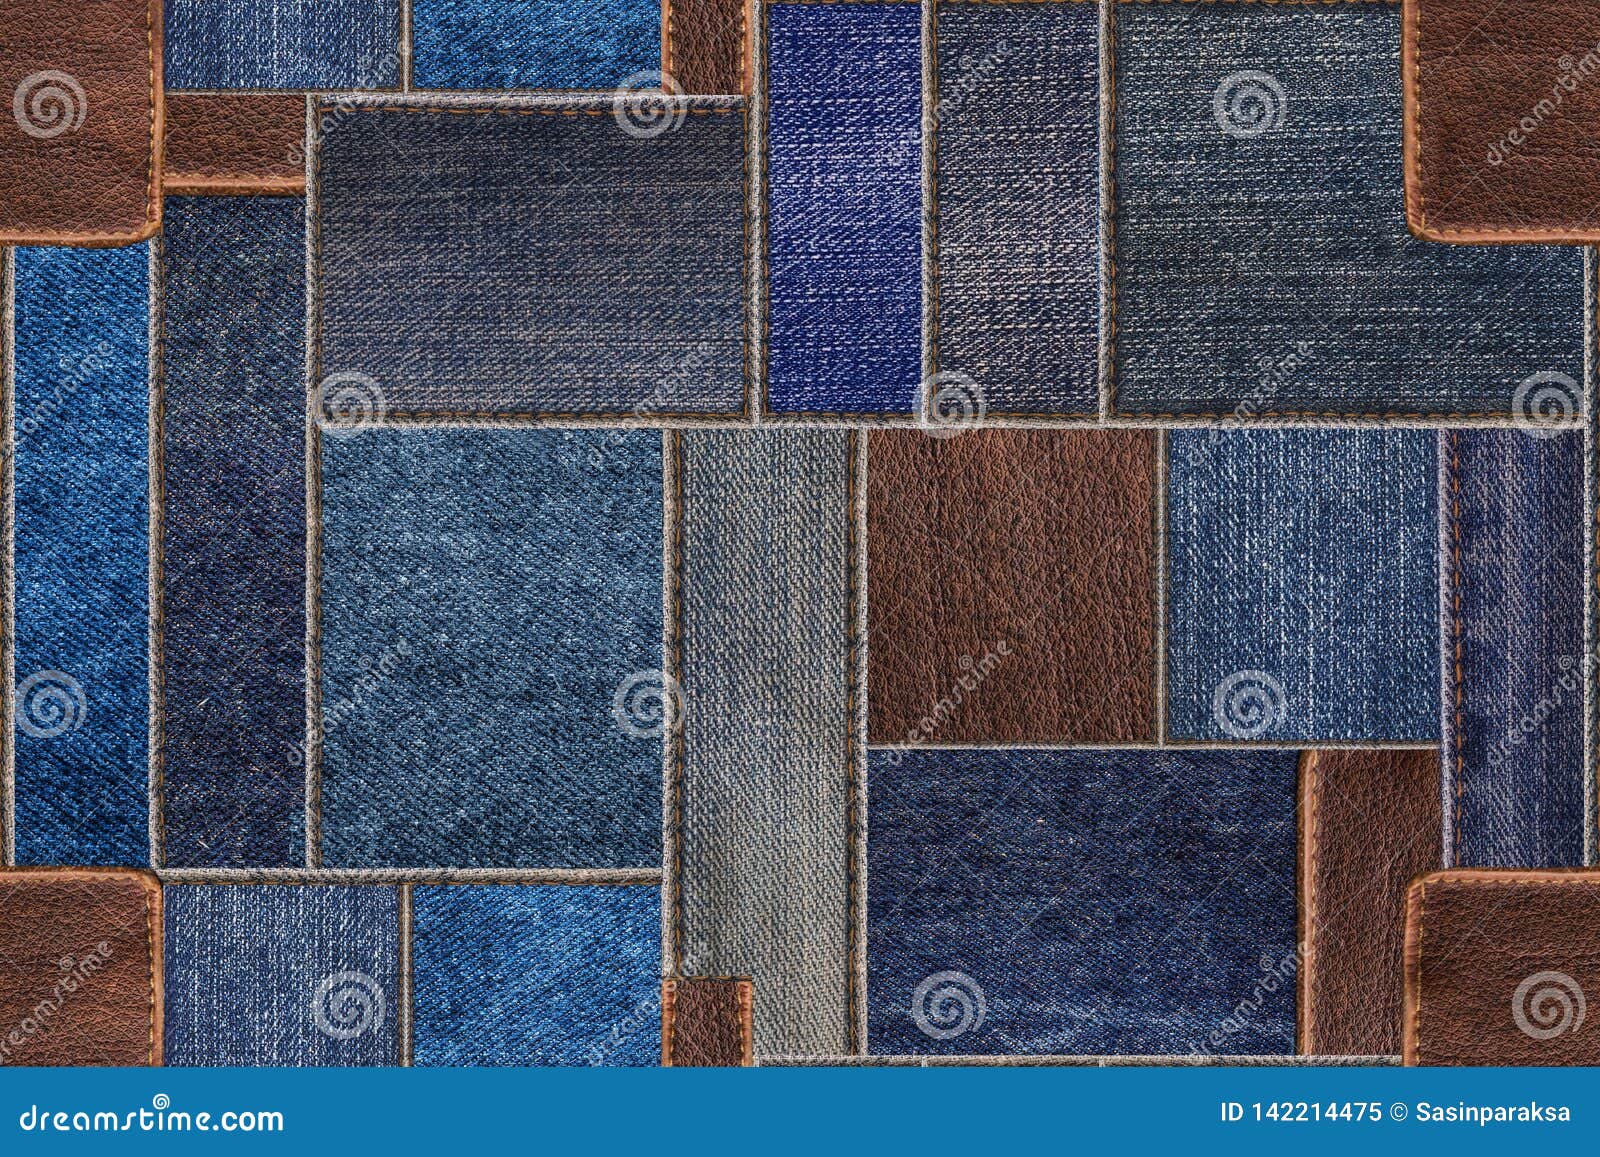 Seamless Blue Denim Jeans Patchwork with Leather Texture. Seamless ...